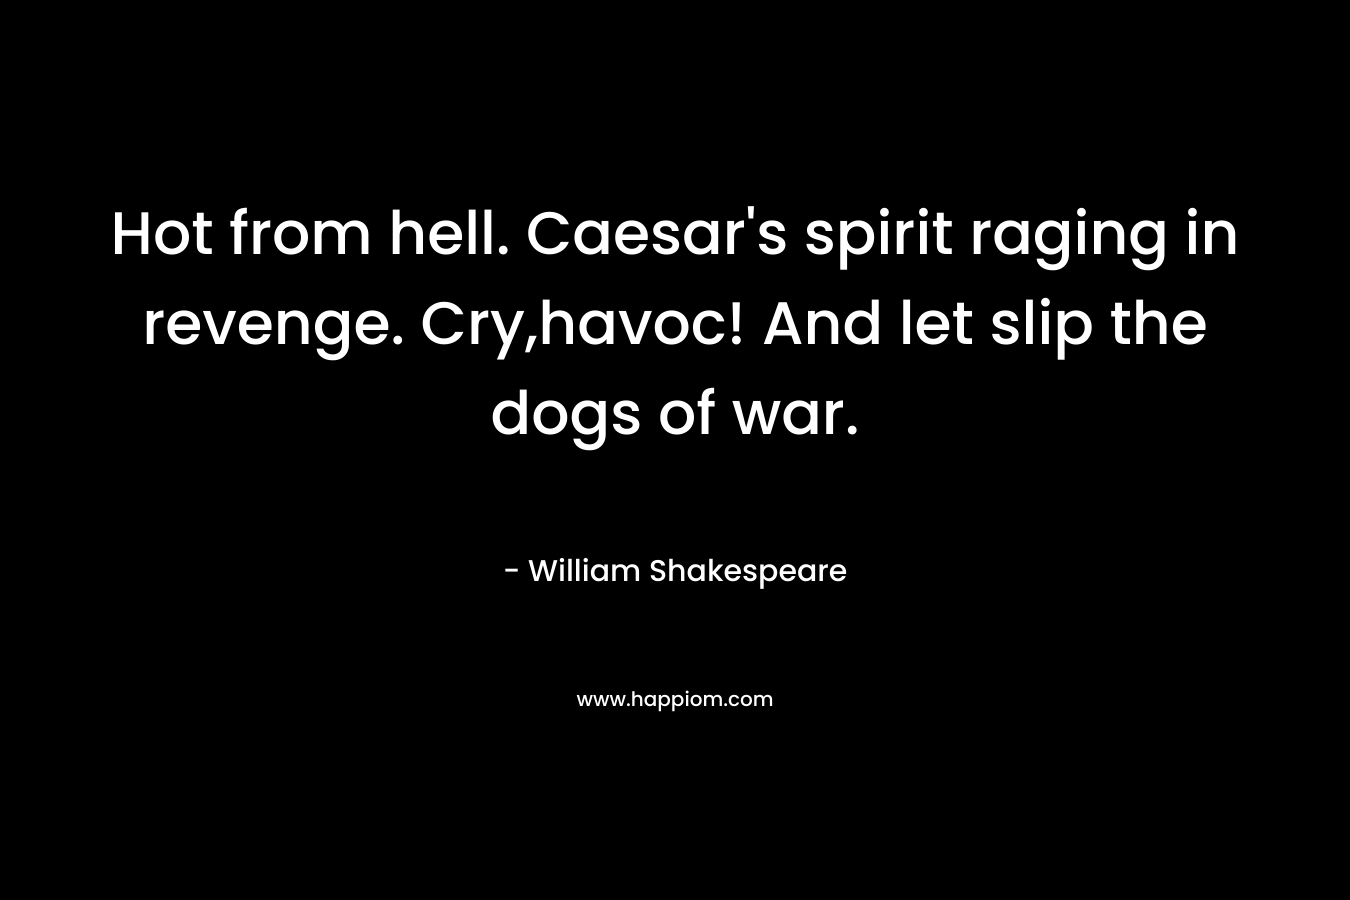 Hot from hell. Caesar’s spirit raging in revenge. Cry,havoc! And let slip the dogs of war. – William Shakespeare